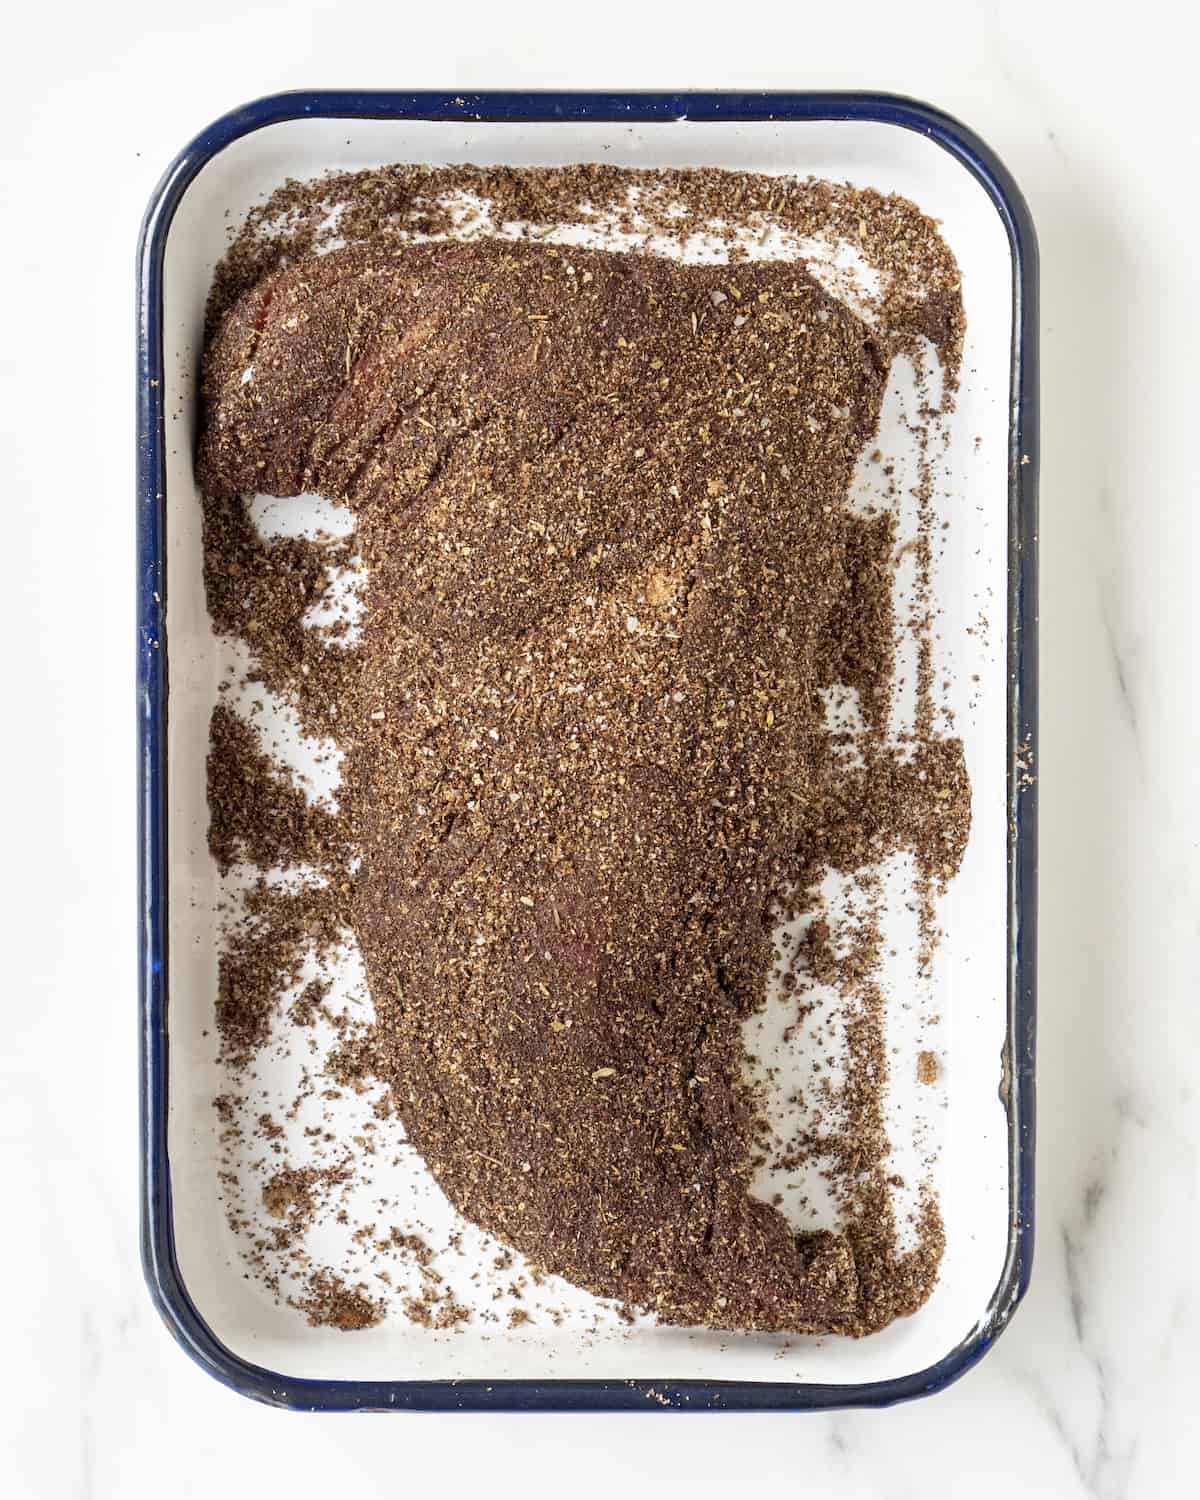 A cut of tri-tip sitting in a baking dish covered with the meat rub.  